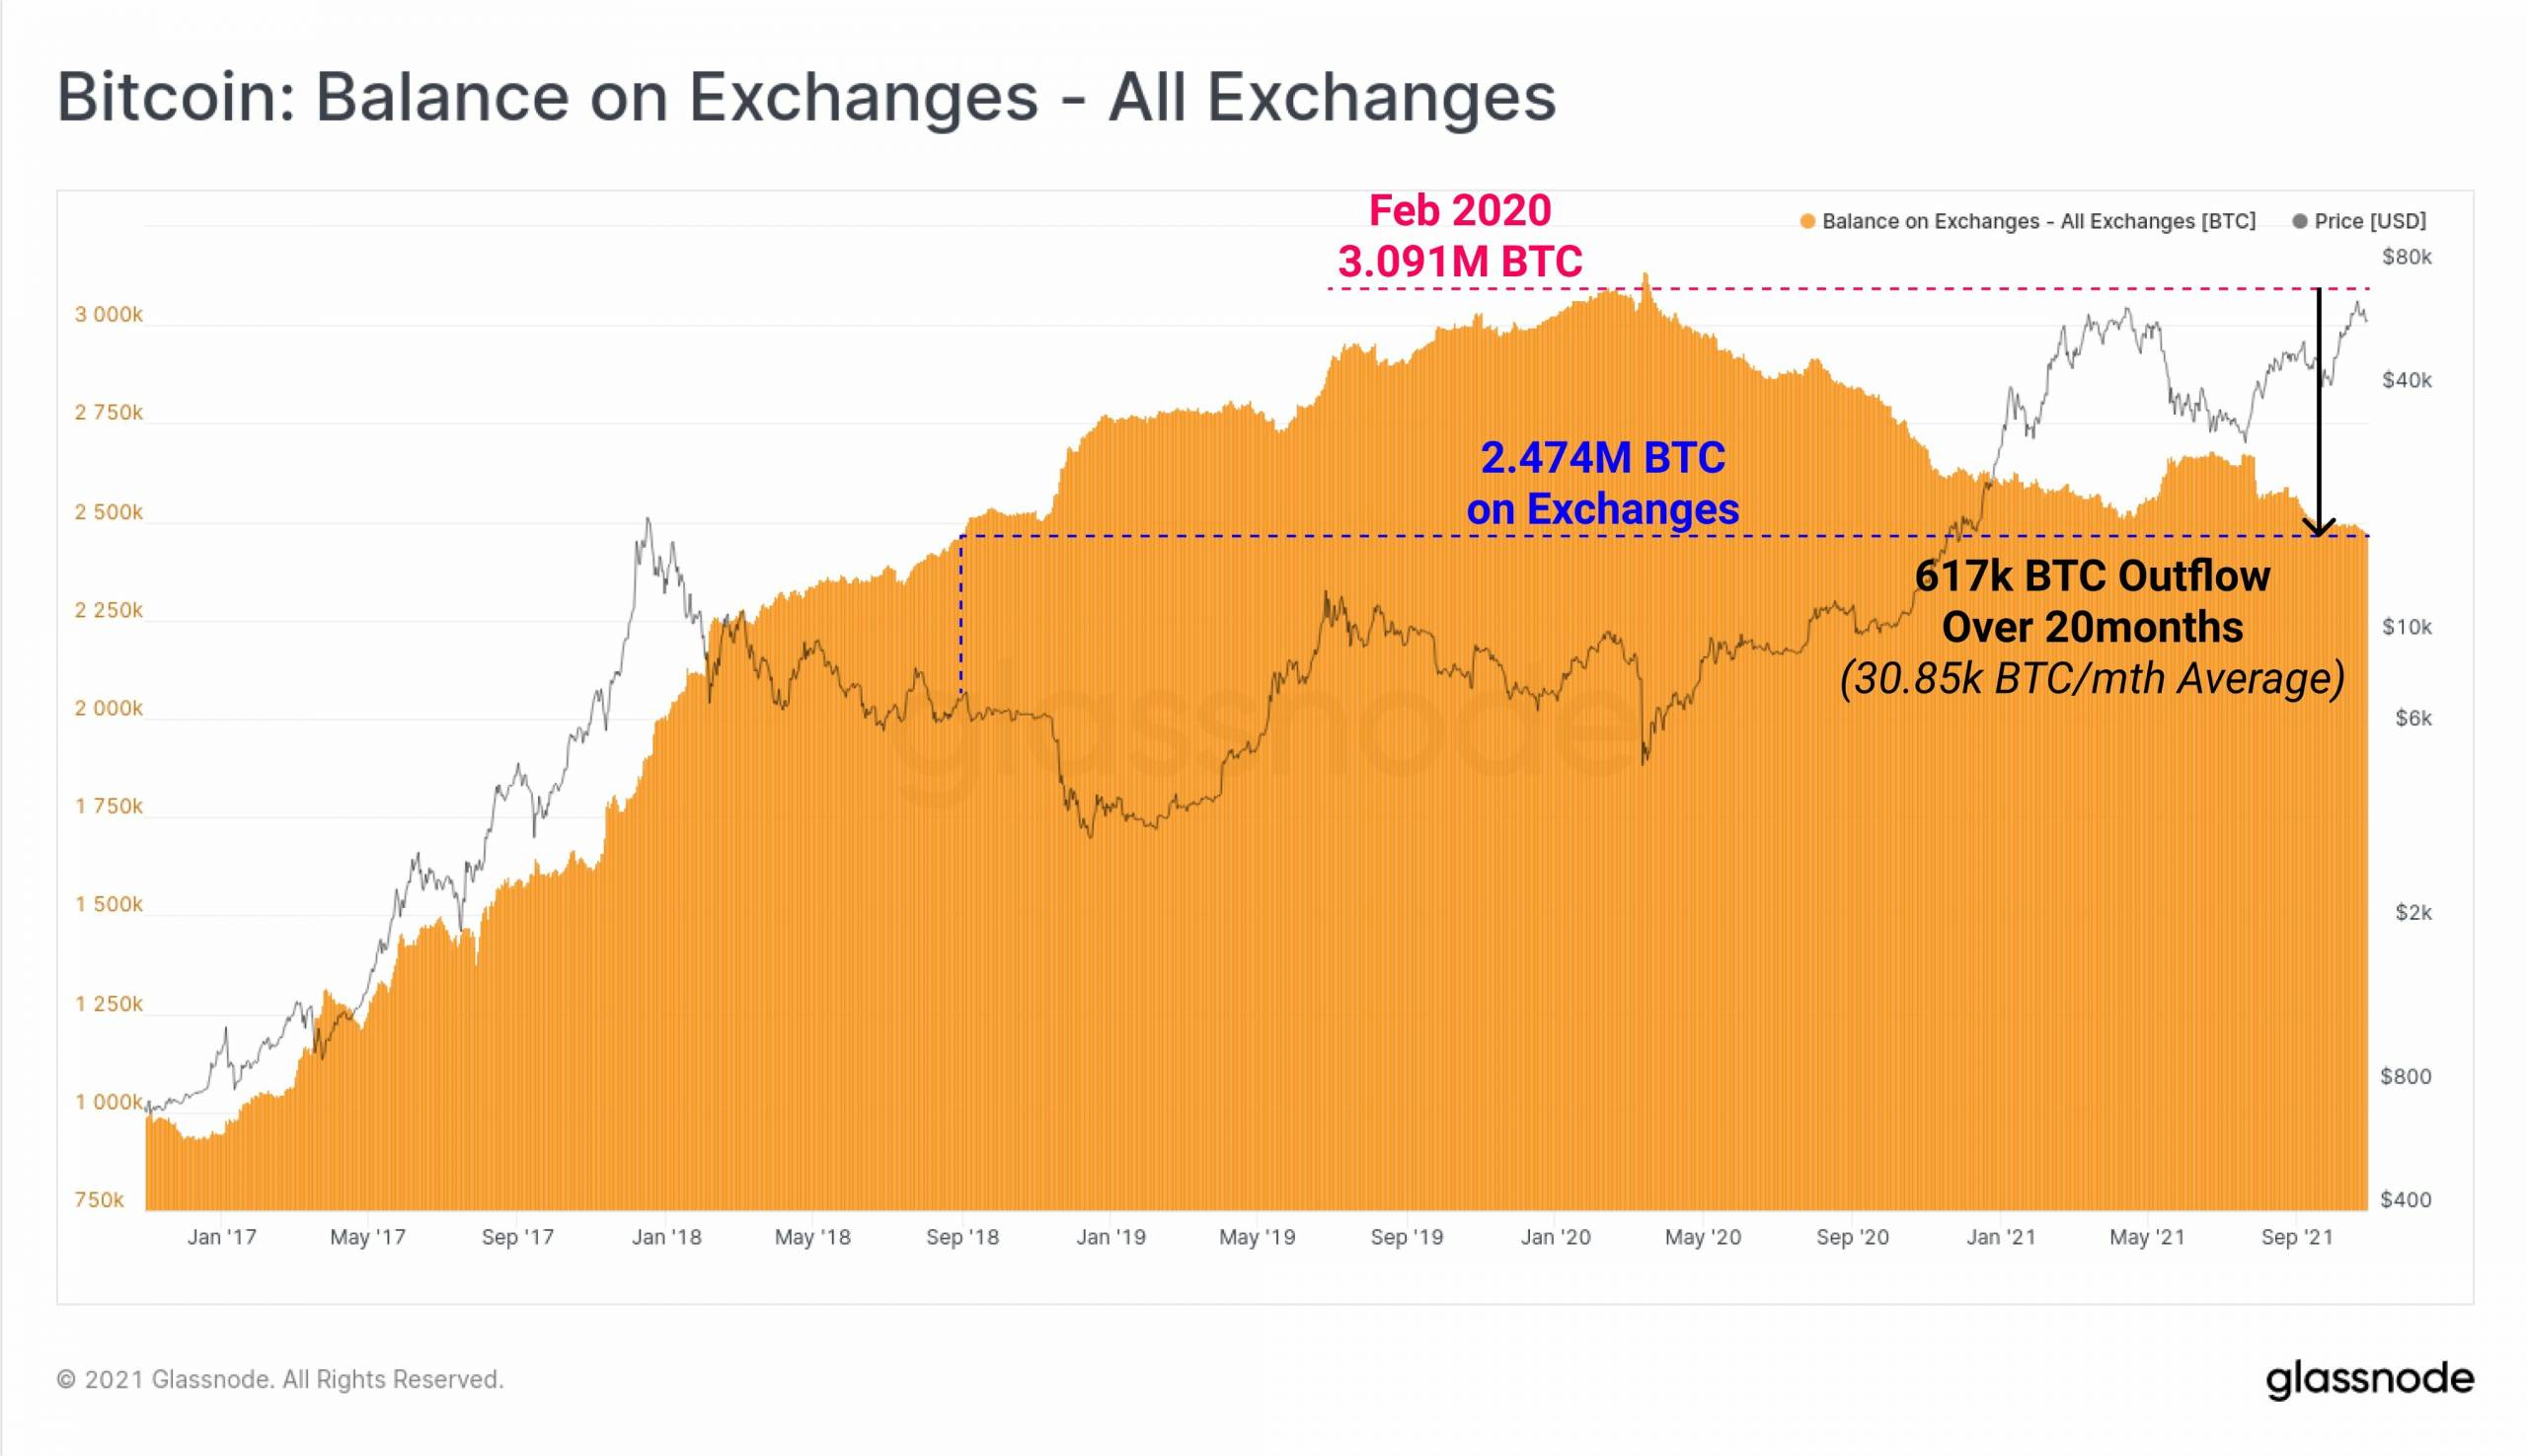 Bitcoin Balance on Cryptocurrency Exchanges, Source: Glassnode